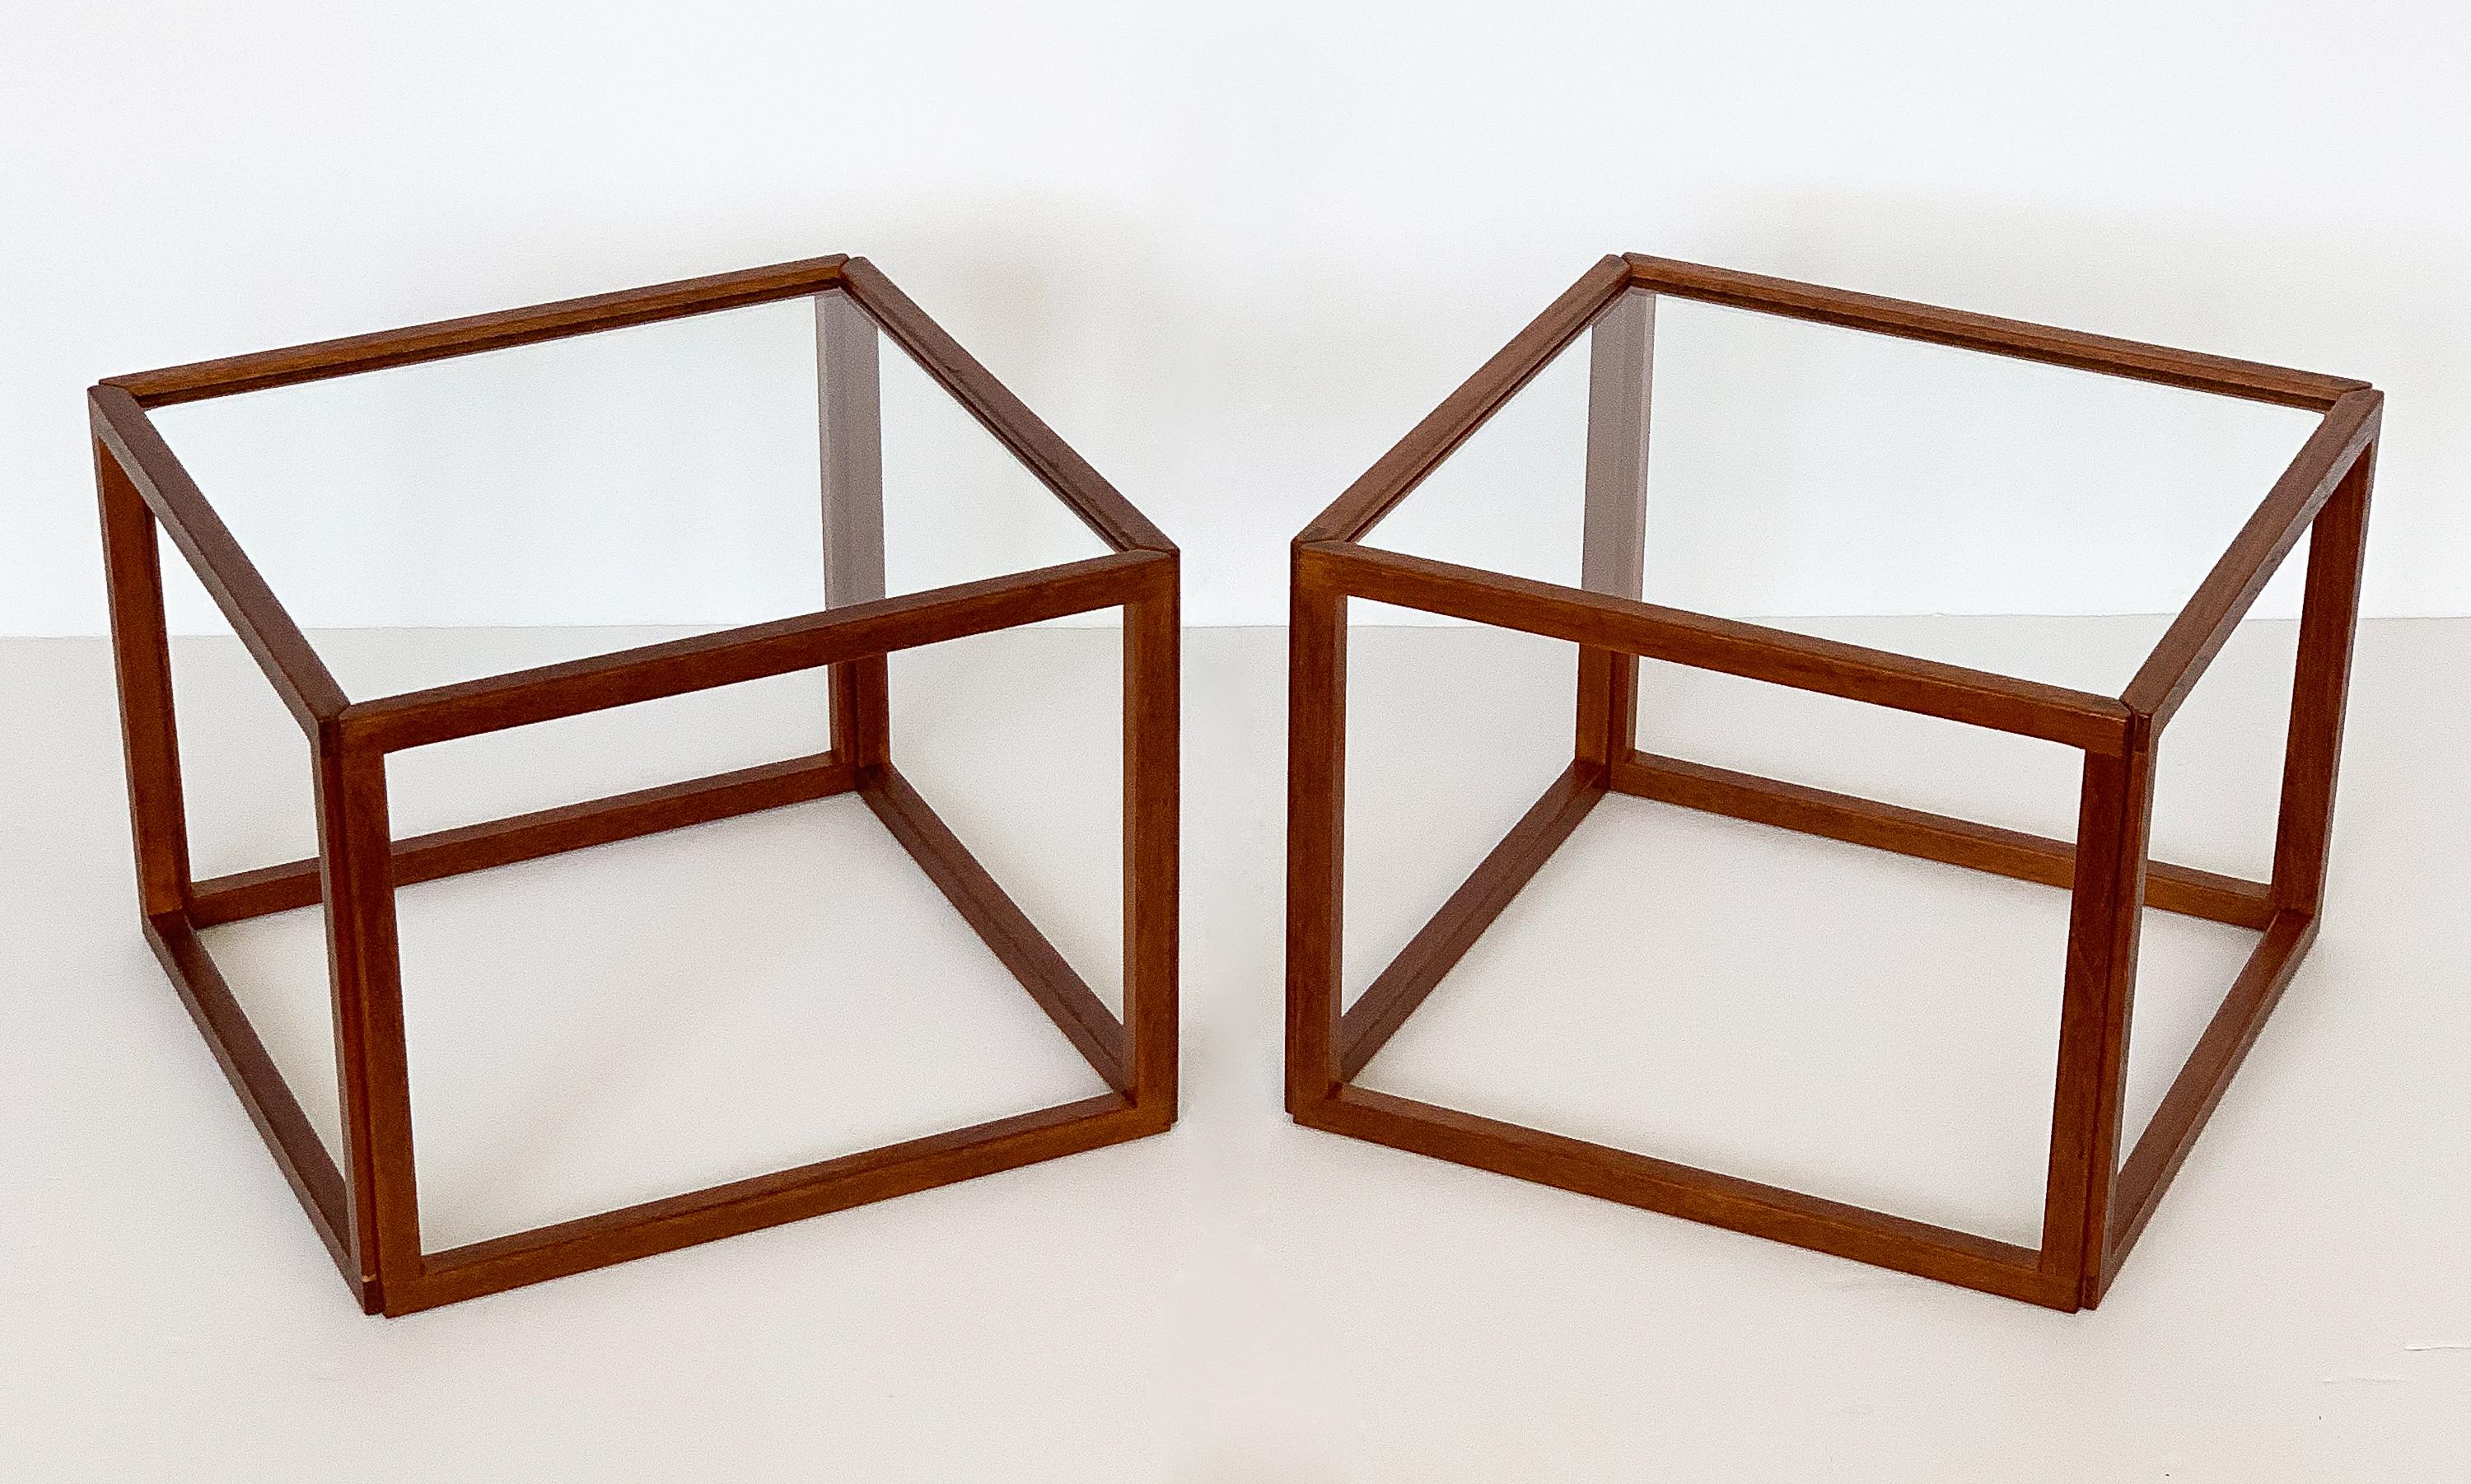 Pair of Kai Kristiansen teak cube side tables with fixed glass tops within the frames. Manufactured in Denmark, circa 1960s. Open cube framework in solid teak with glass top. Exposed tongue and grove joinery. Modern and architectural in form.